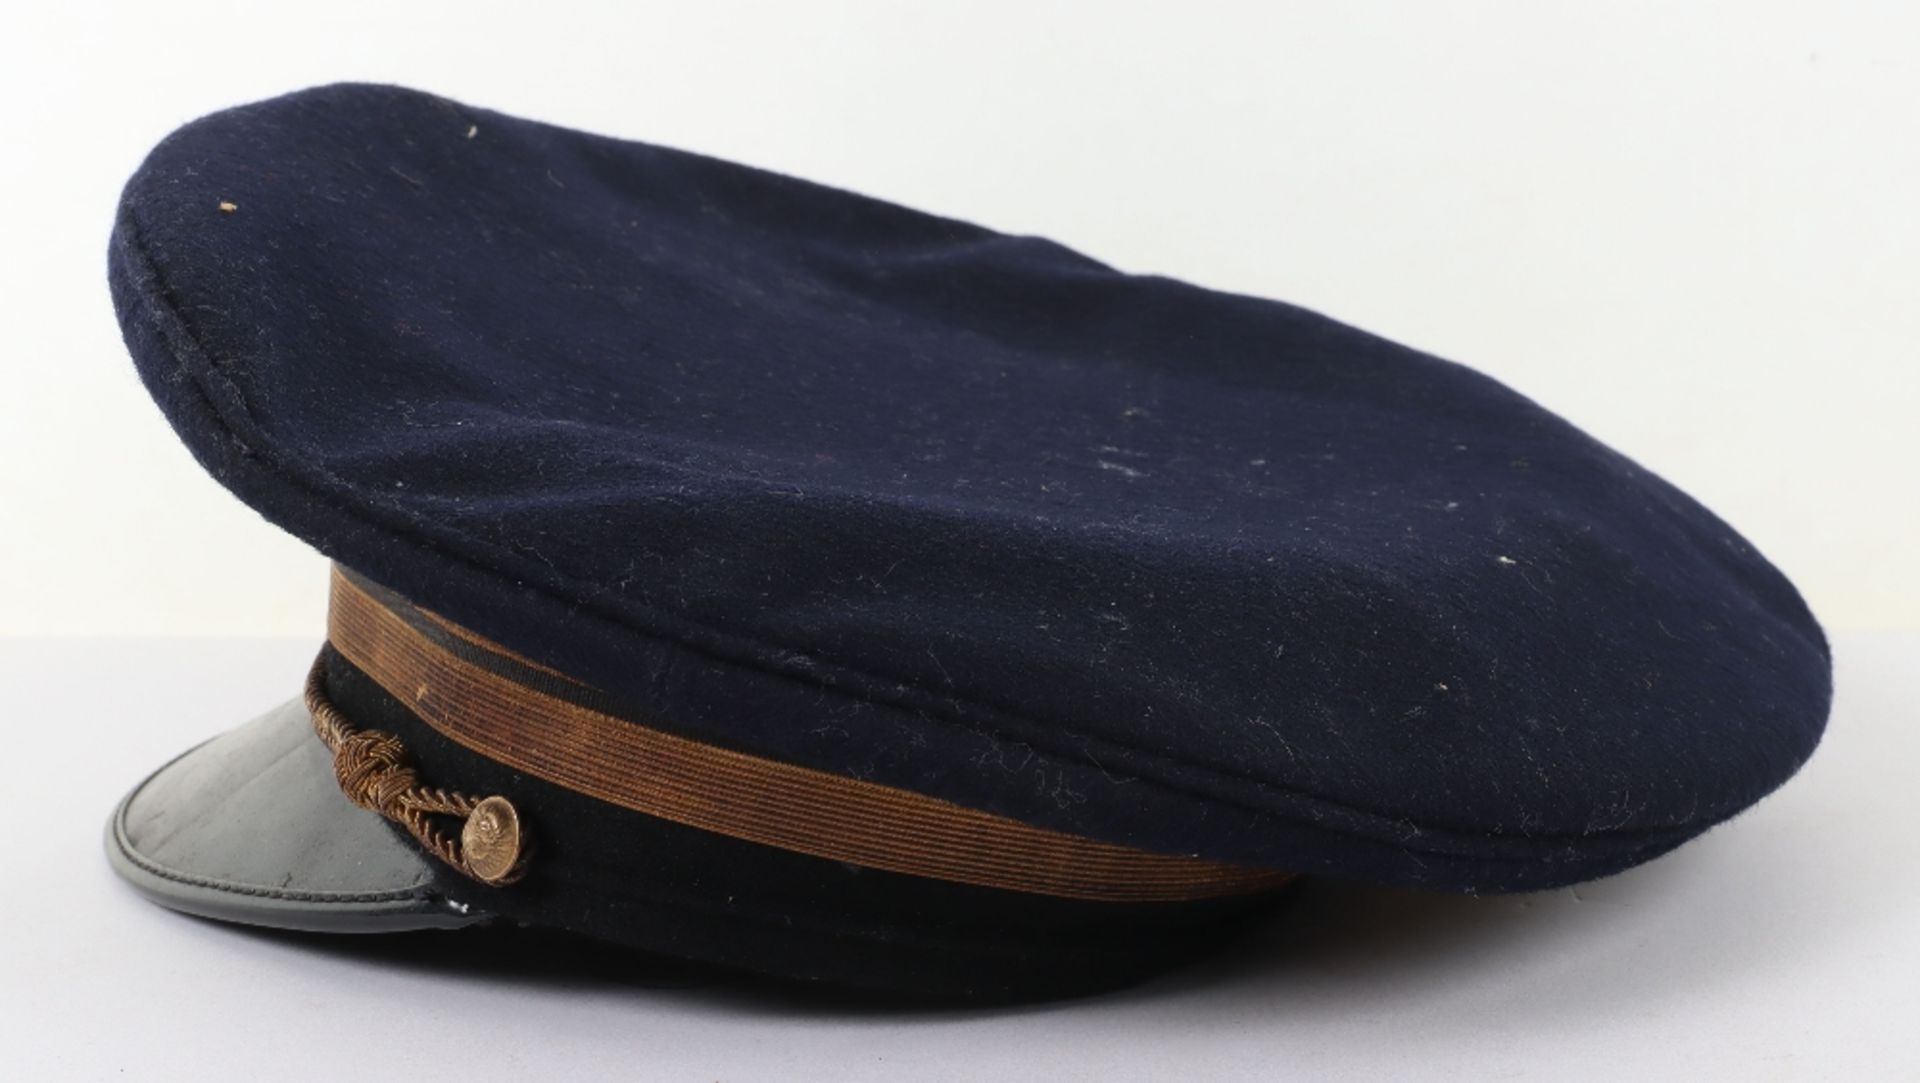 French Airforce Officers Peaked Cap - Image 4 of 7